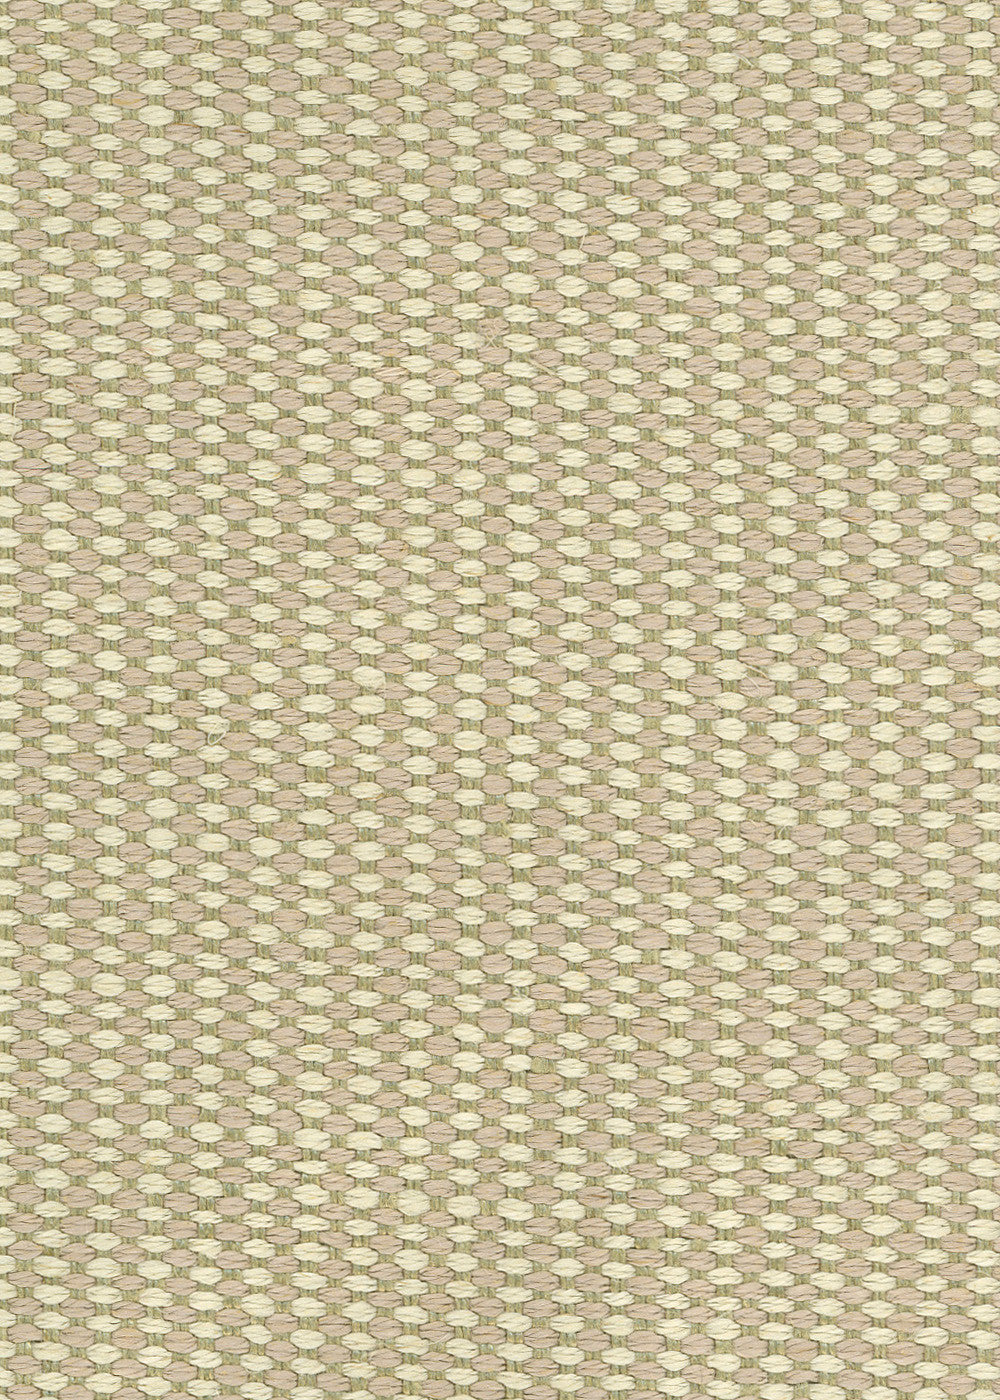 basketweave linen fabric in multicolored cream and green